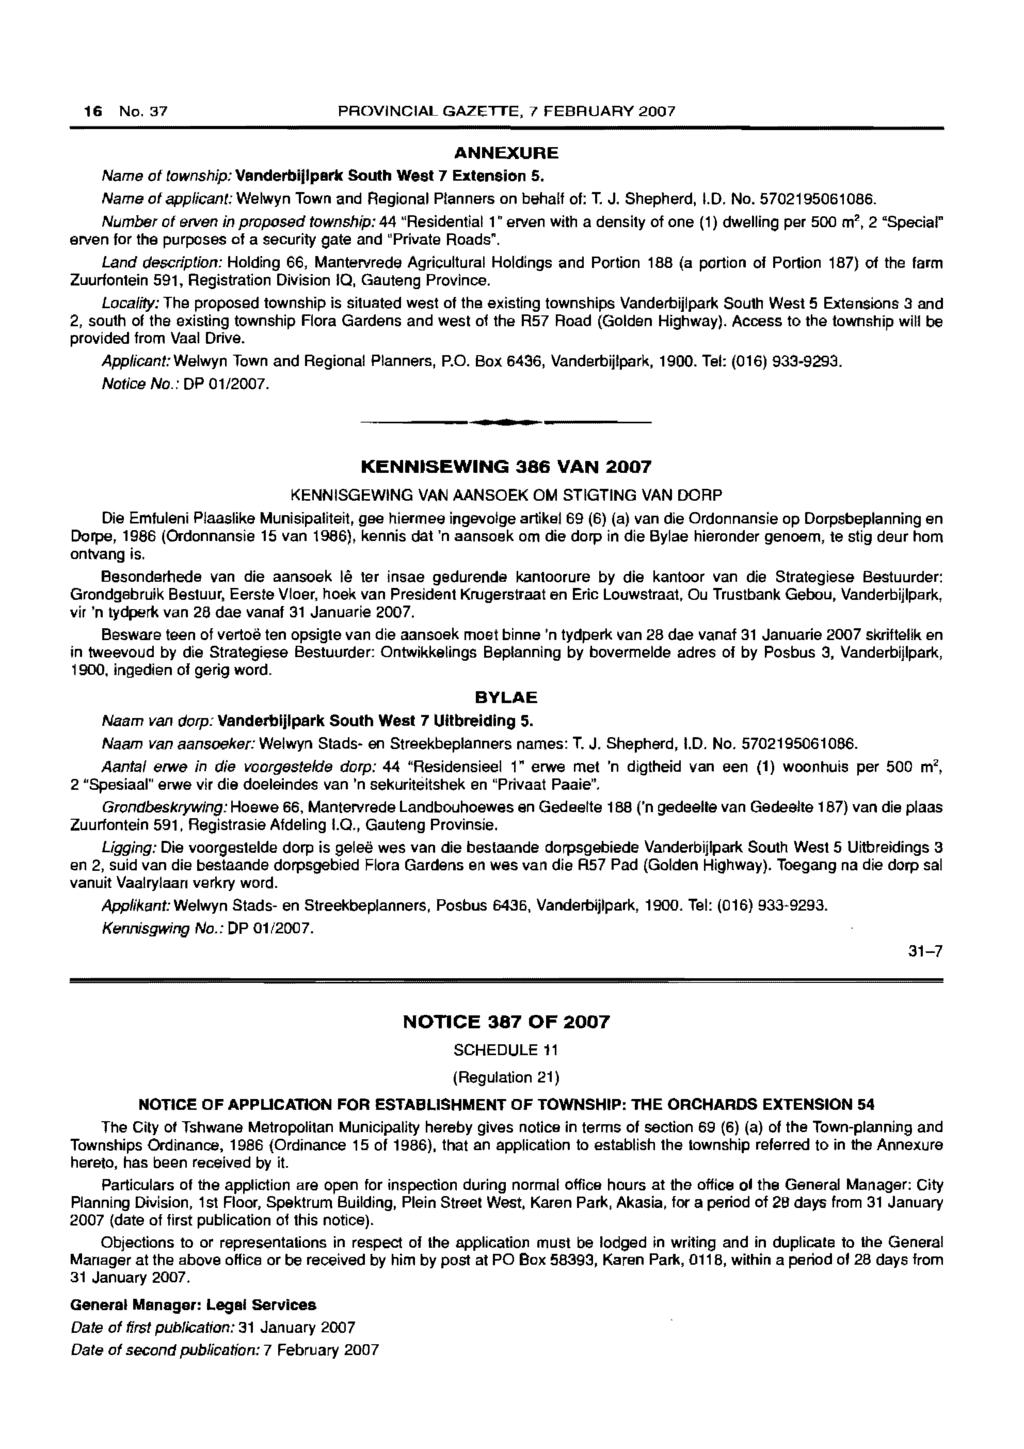 16 No. 37 PROVINCIAL GAZETTE, 7 FEBRUARY 2007 ANNEXURE Name of township: Vanderbiilpark South West 7 Extension 5. Name of applicant: Welwyn Town and Regional Planners on behall 01: T. J. Shepherd, 1.